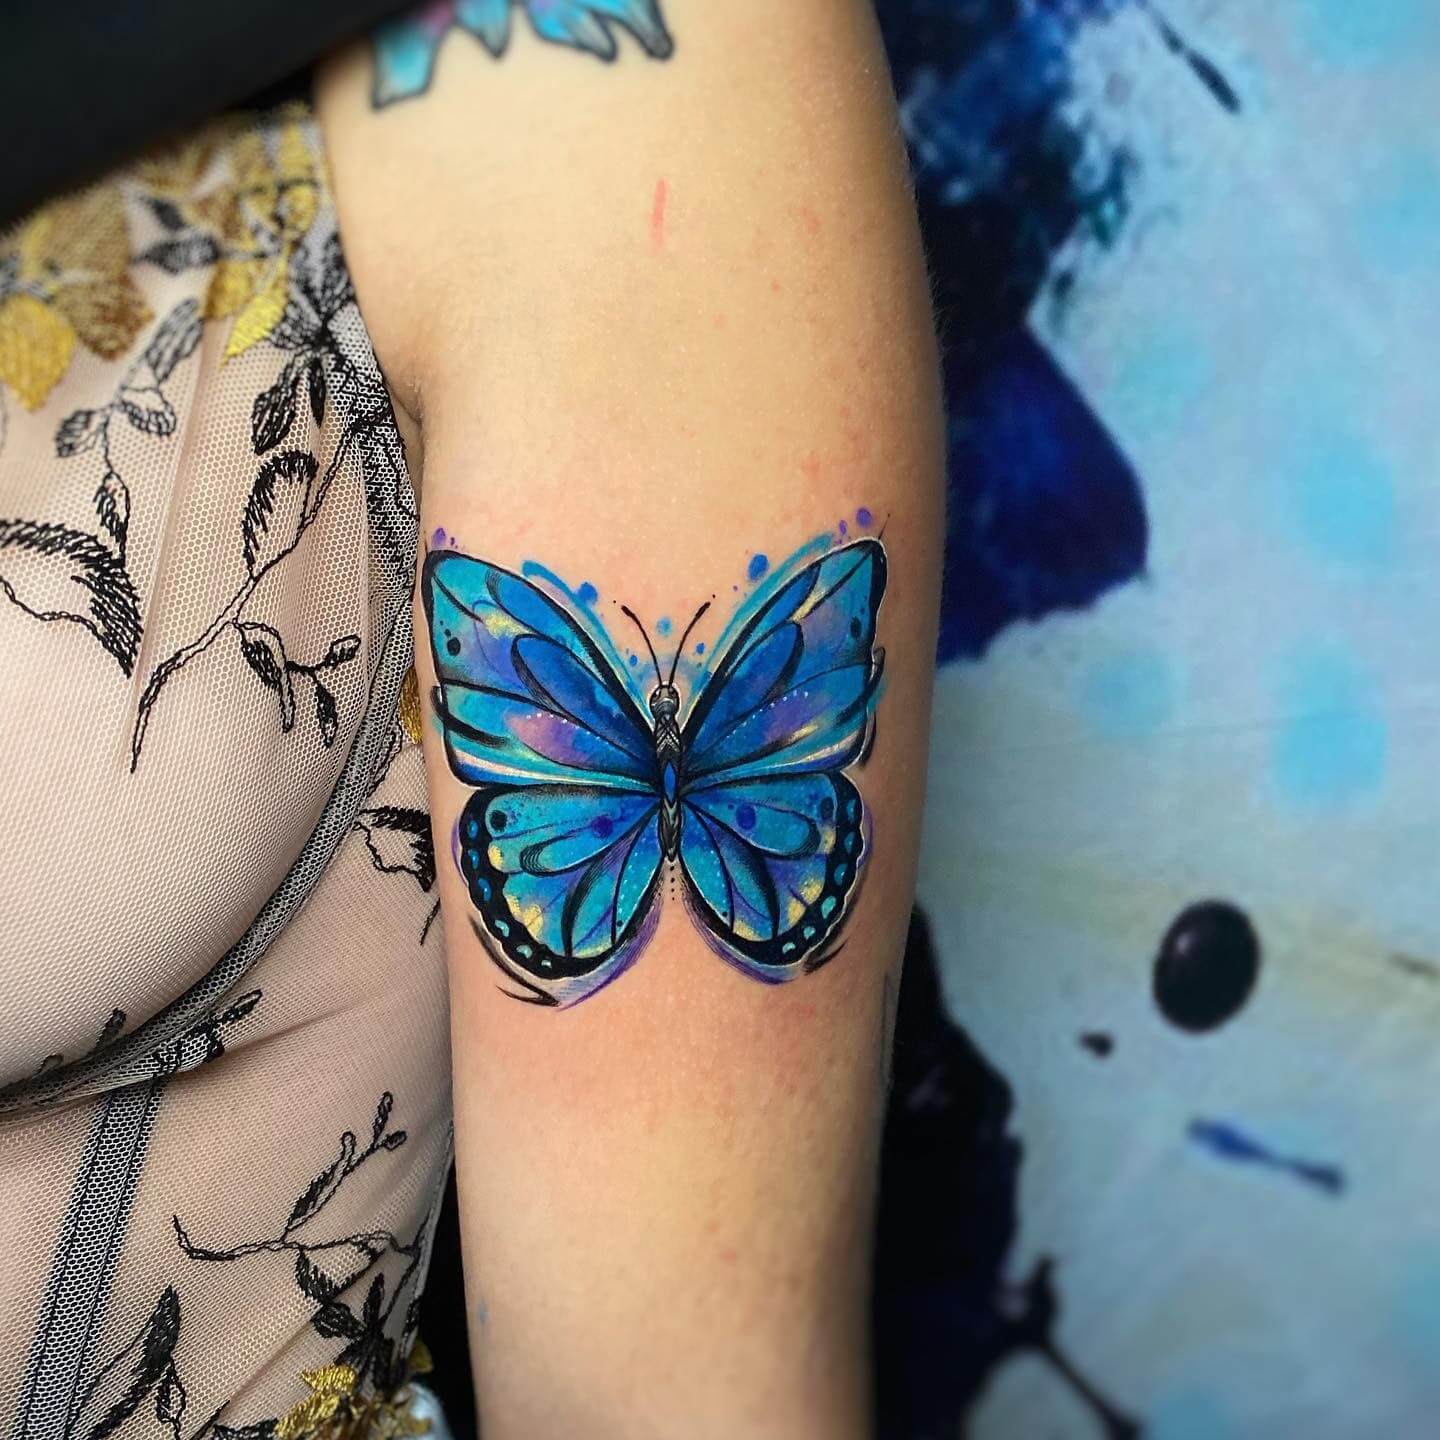 Blue Watercolor Butterfly Tattoo on Arm